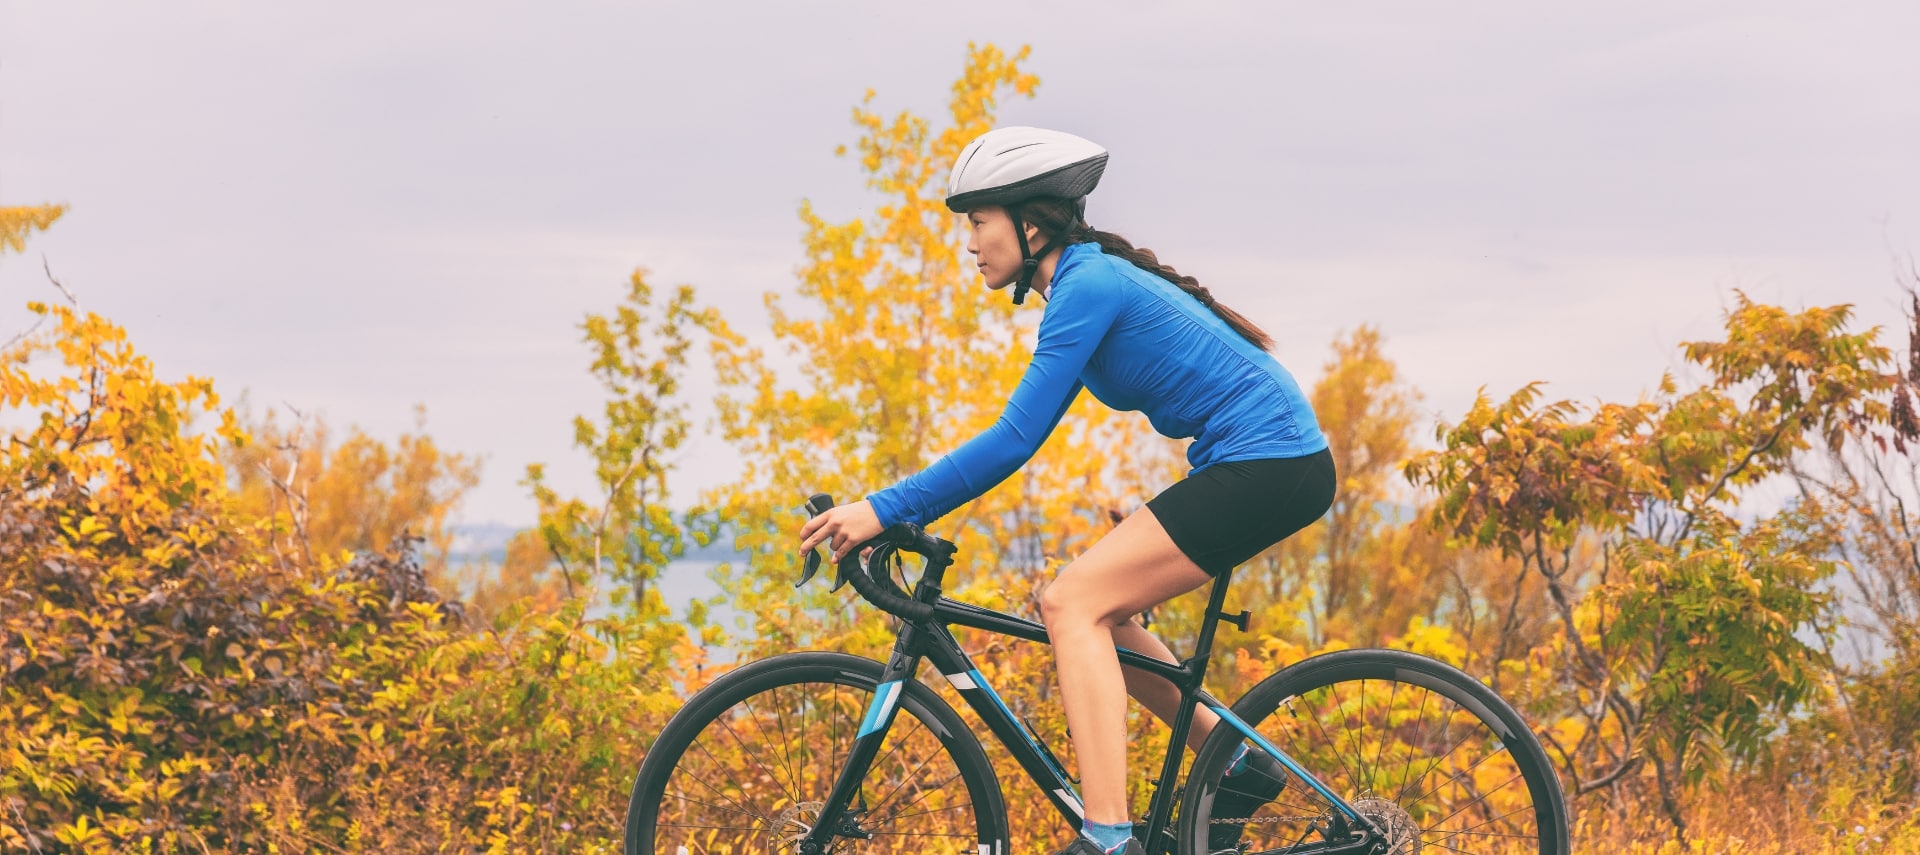 A woman in blue shirt and shorts biking on a beautiful autumn day